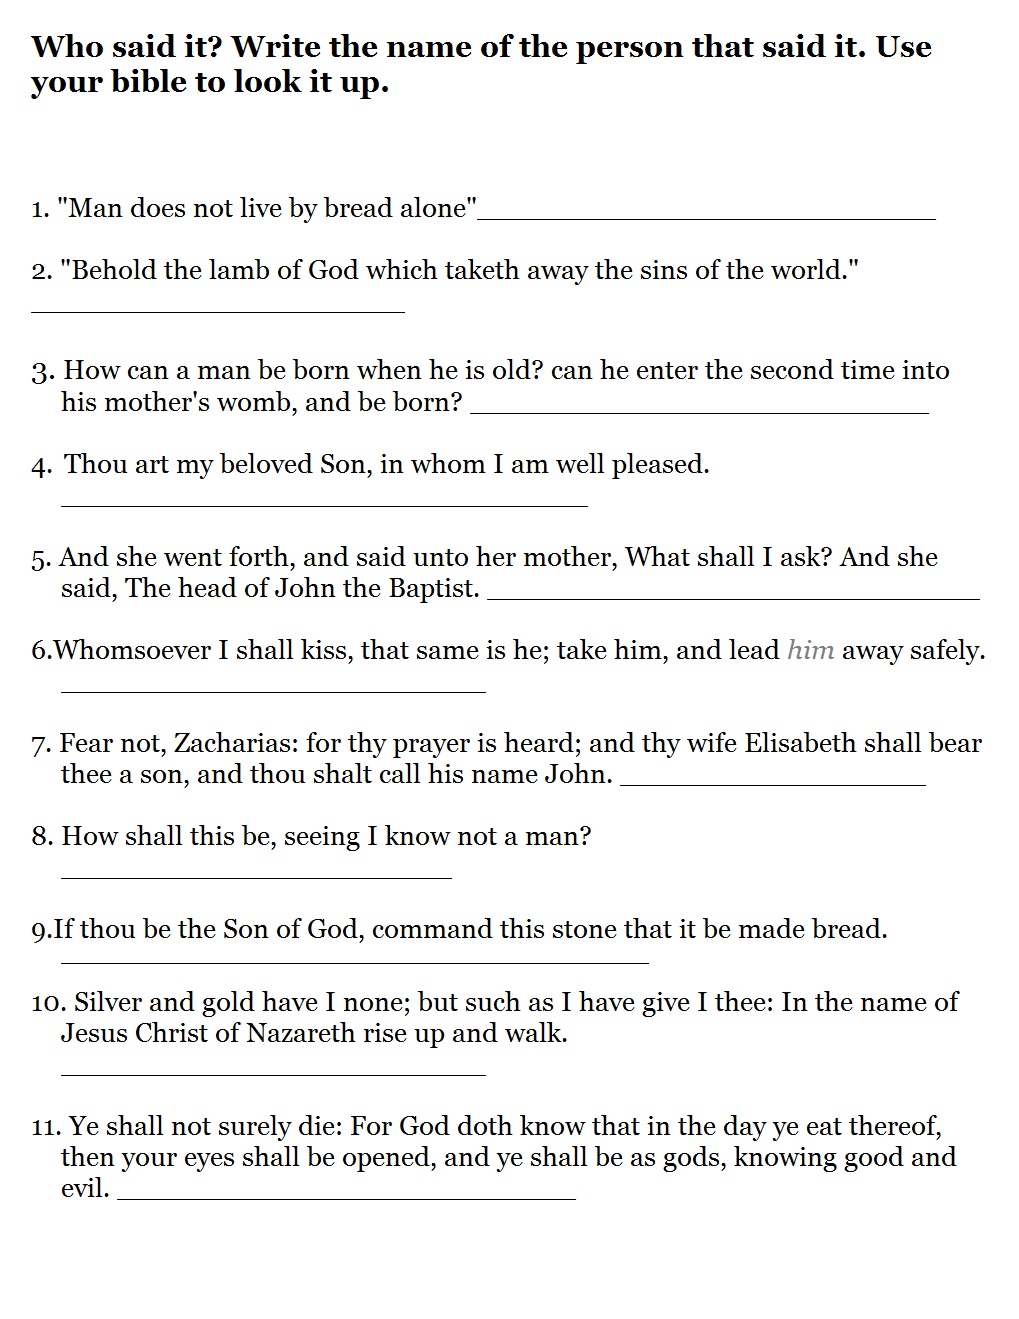 printable-king-james-bible-trivia-questions-and-answers-who-is-the